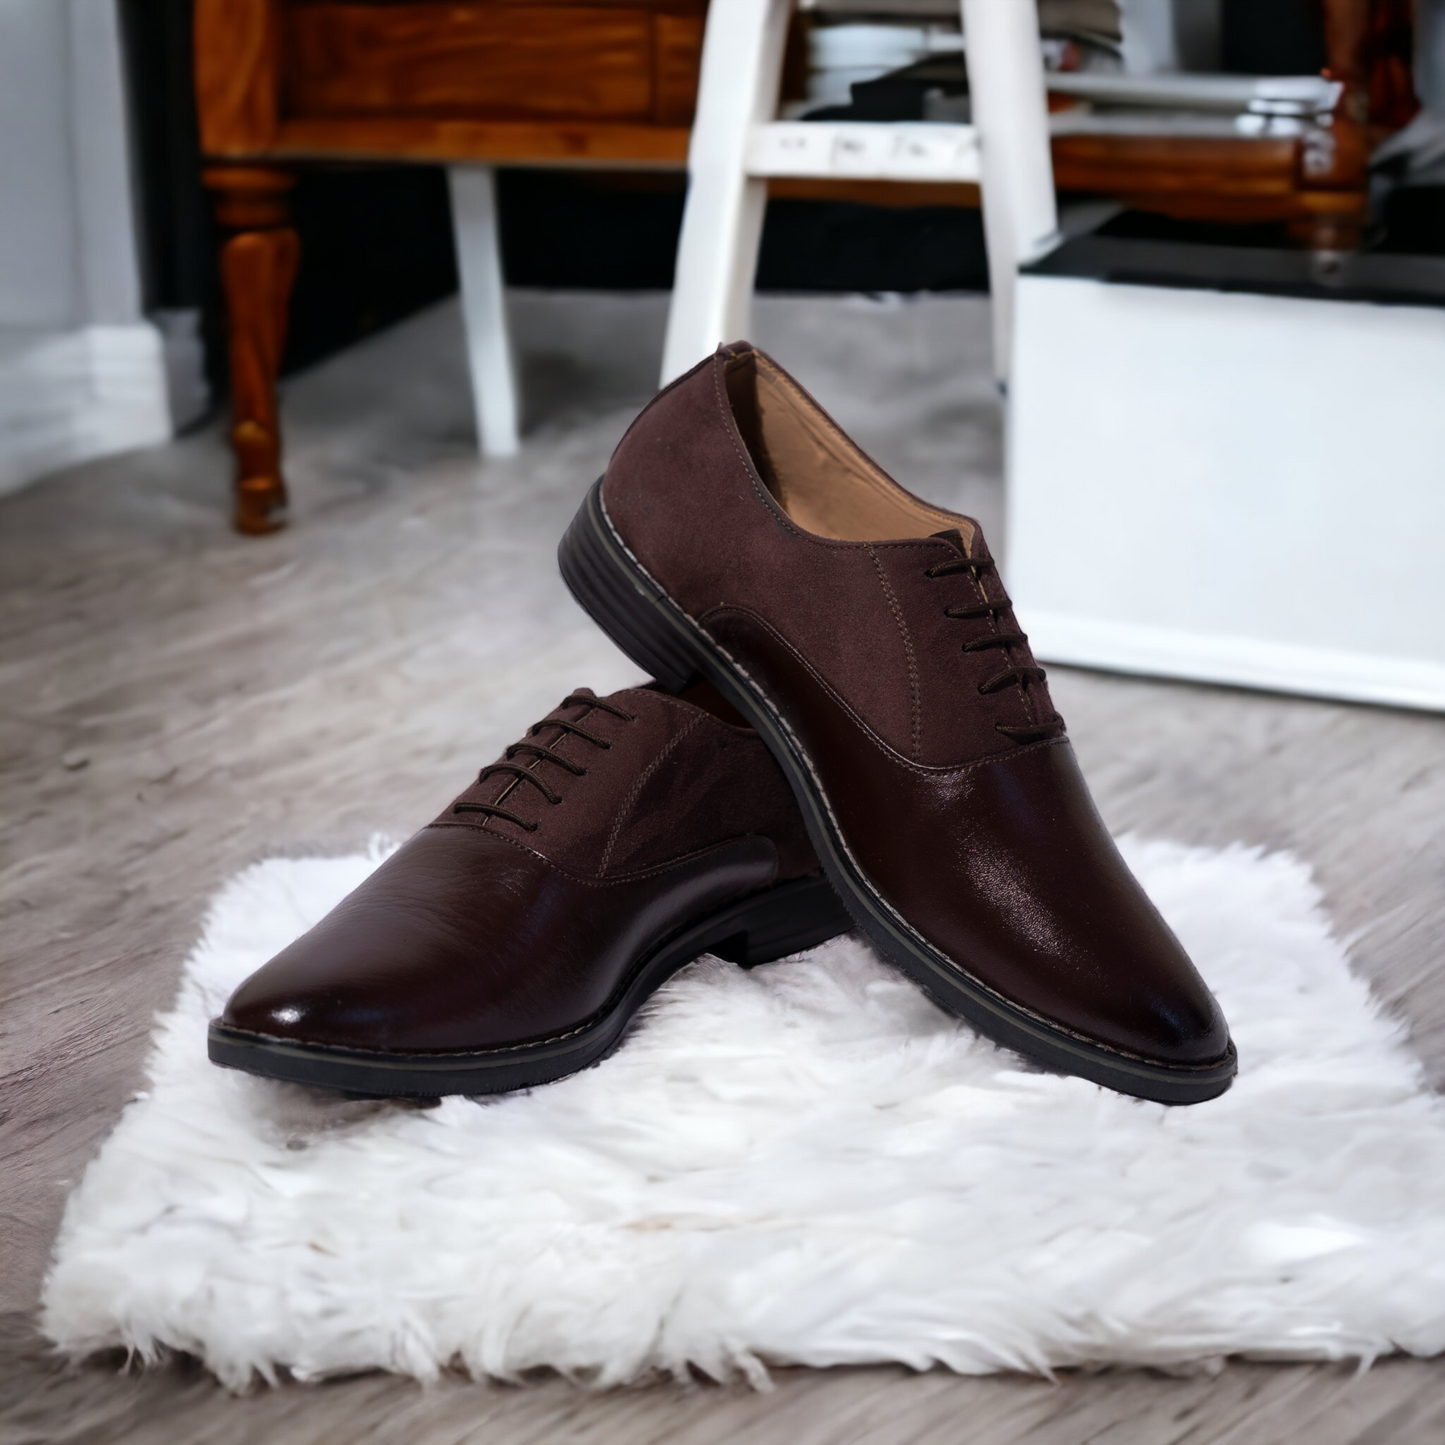 The Aurous Stride Laceup Formal Shoes - Brown